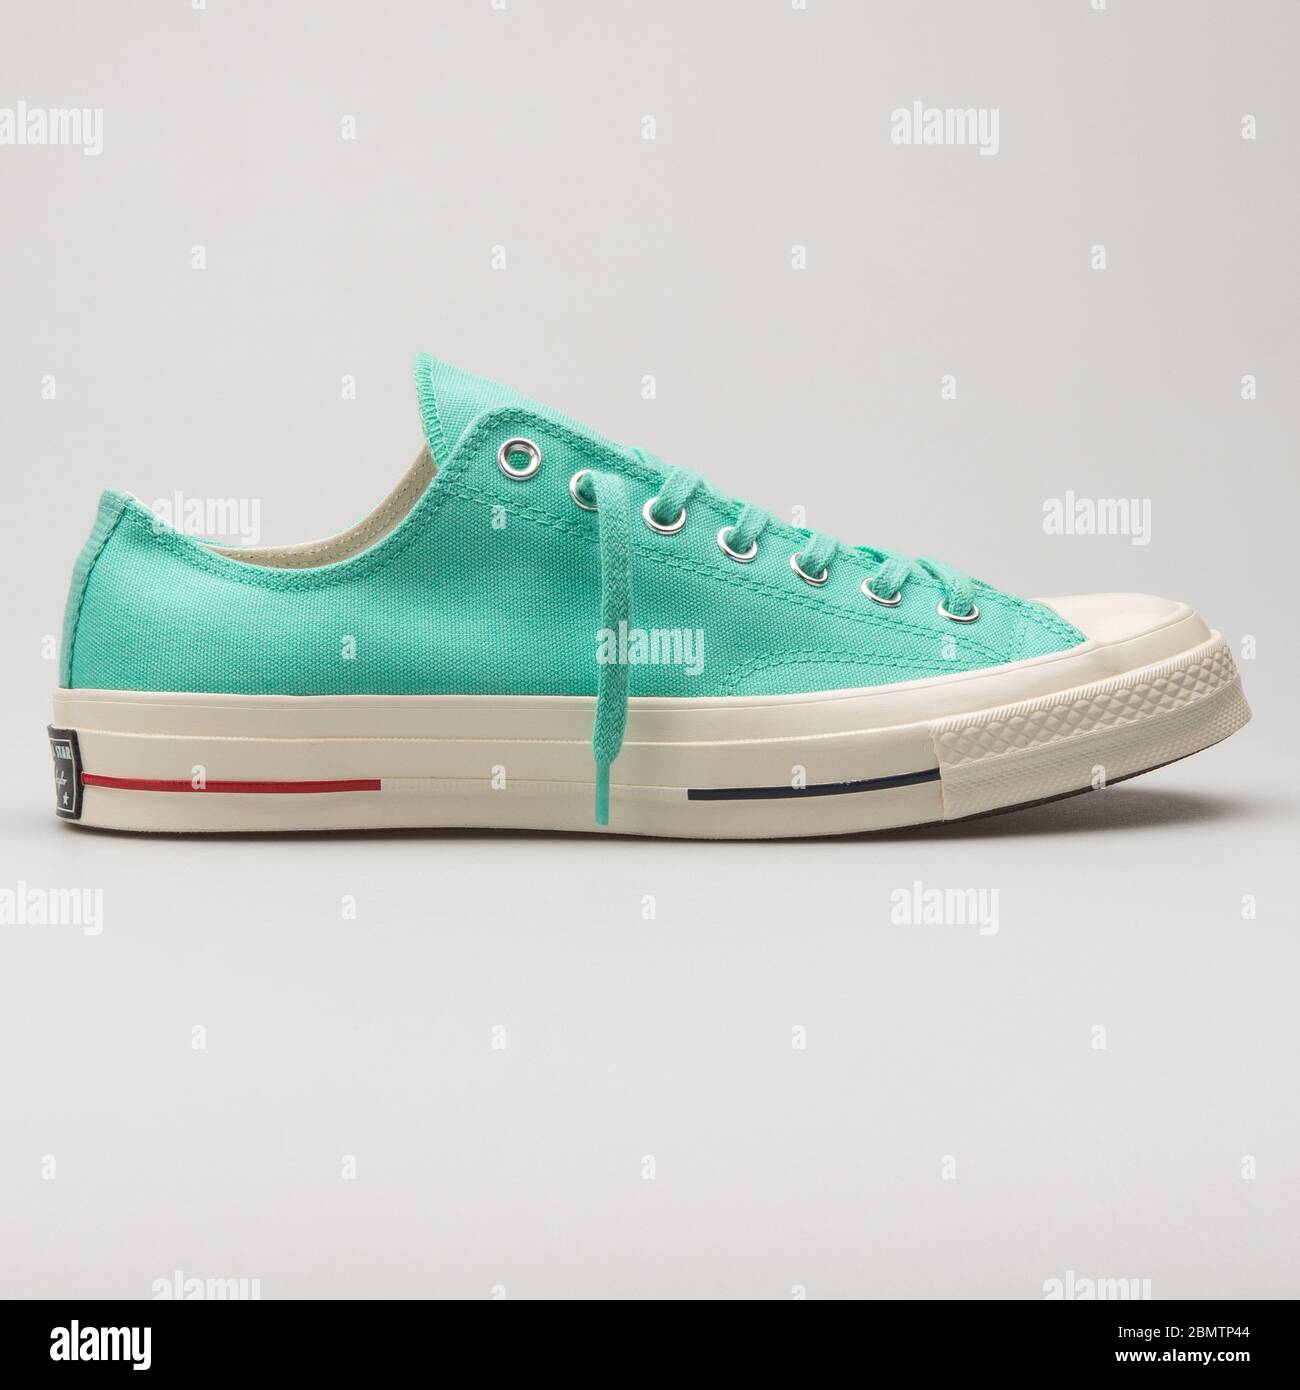 VIENNA, AUSTRIA - FEBRUARY 19, 2018: Converse Chuck Taylor All Star 70 OX  mint green and white sneaker on white background Stock Photo - Alamy